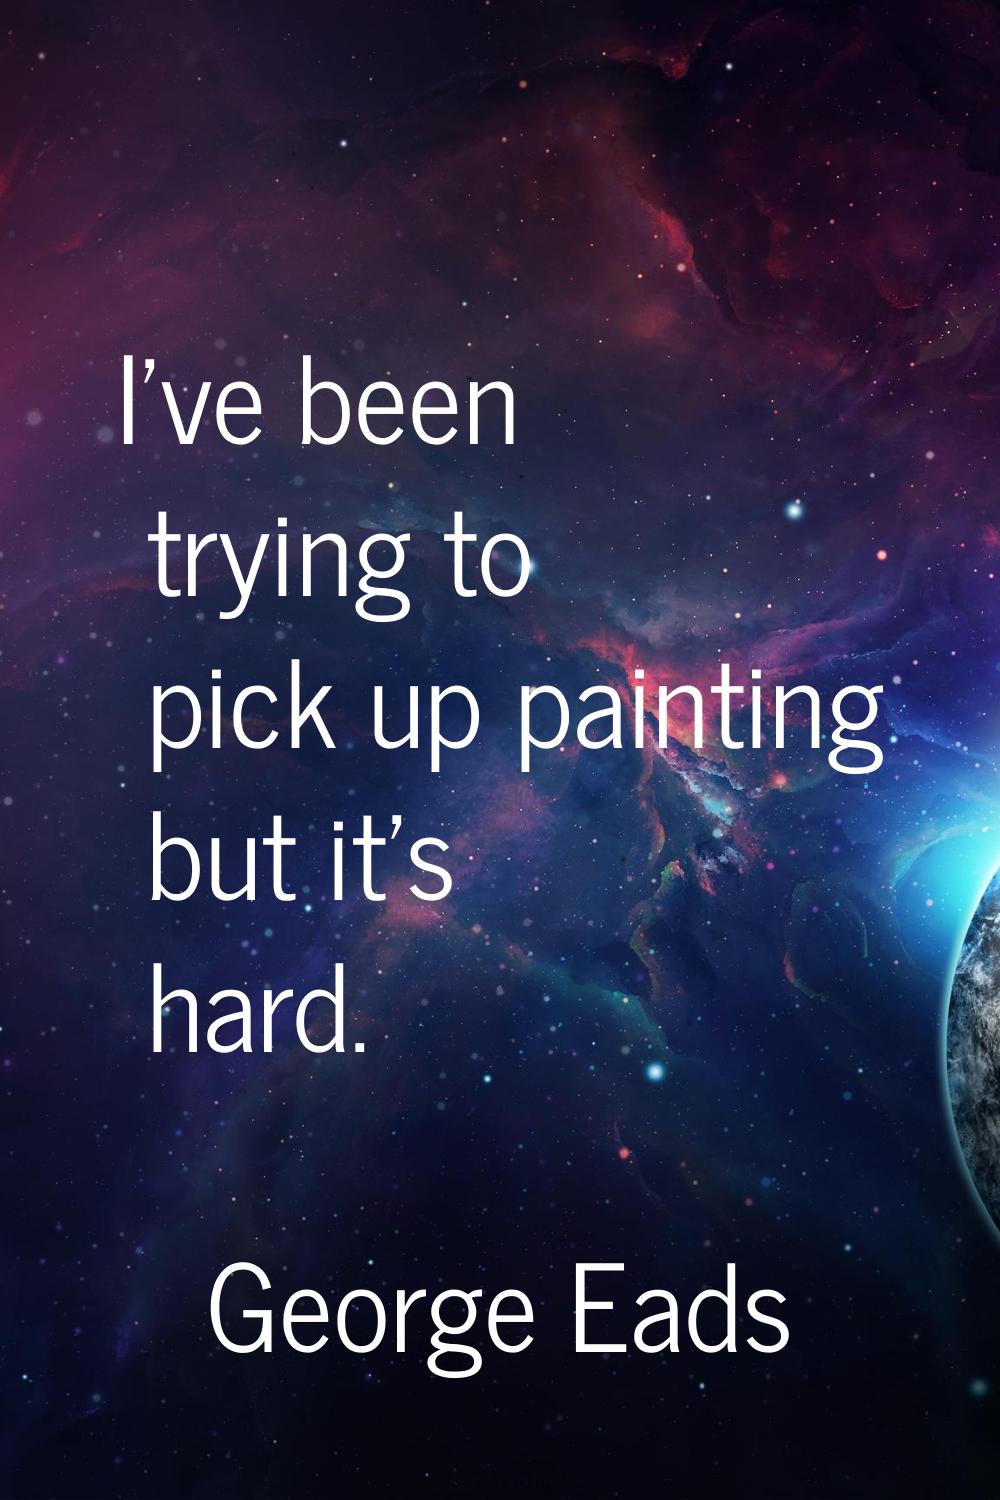 I've been trying to pick up painting but it's hard.